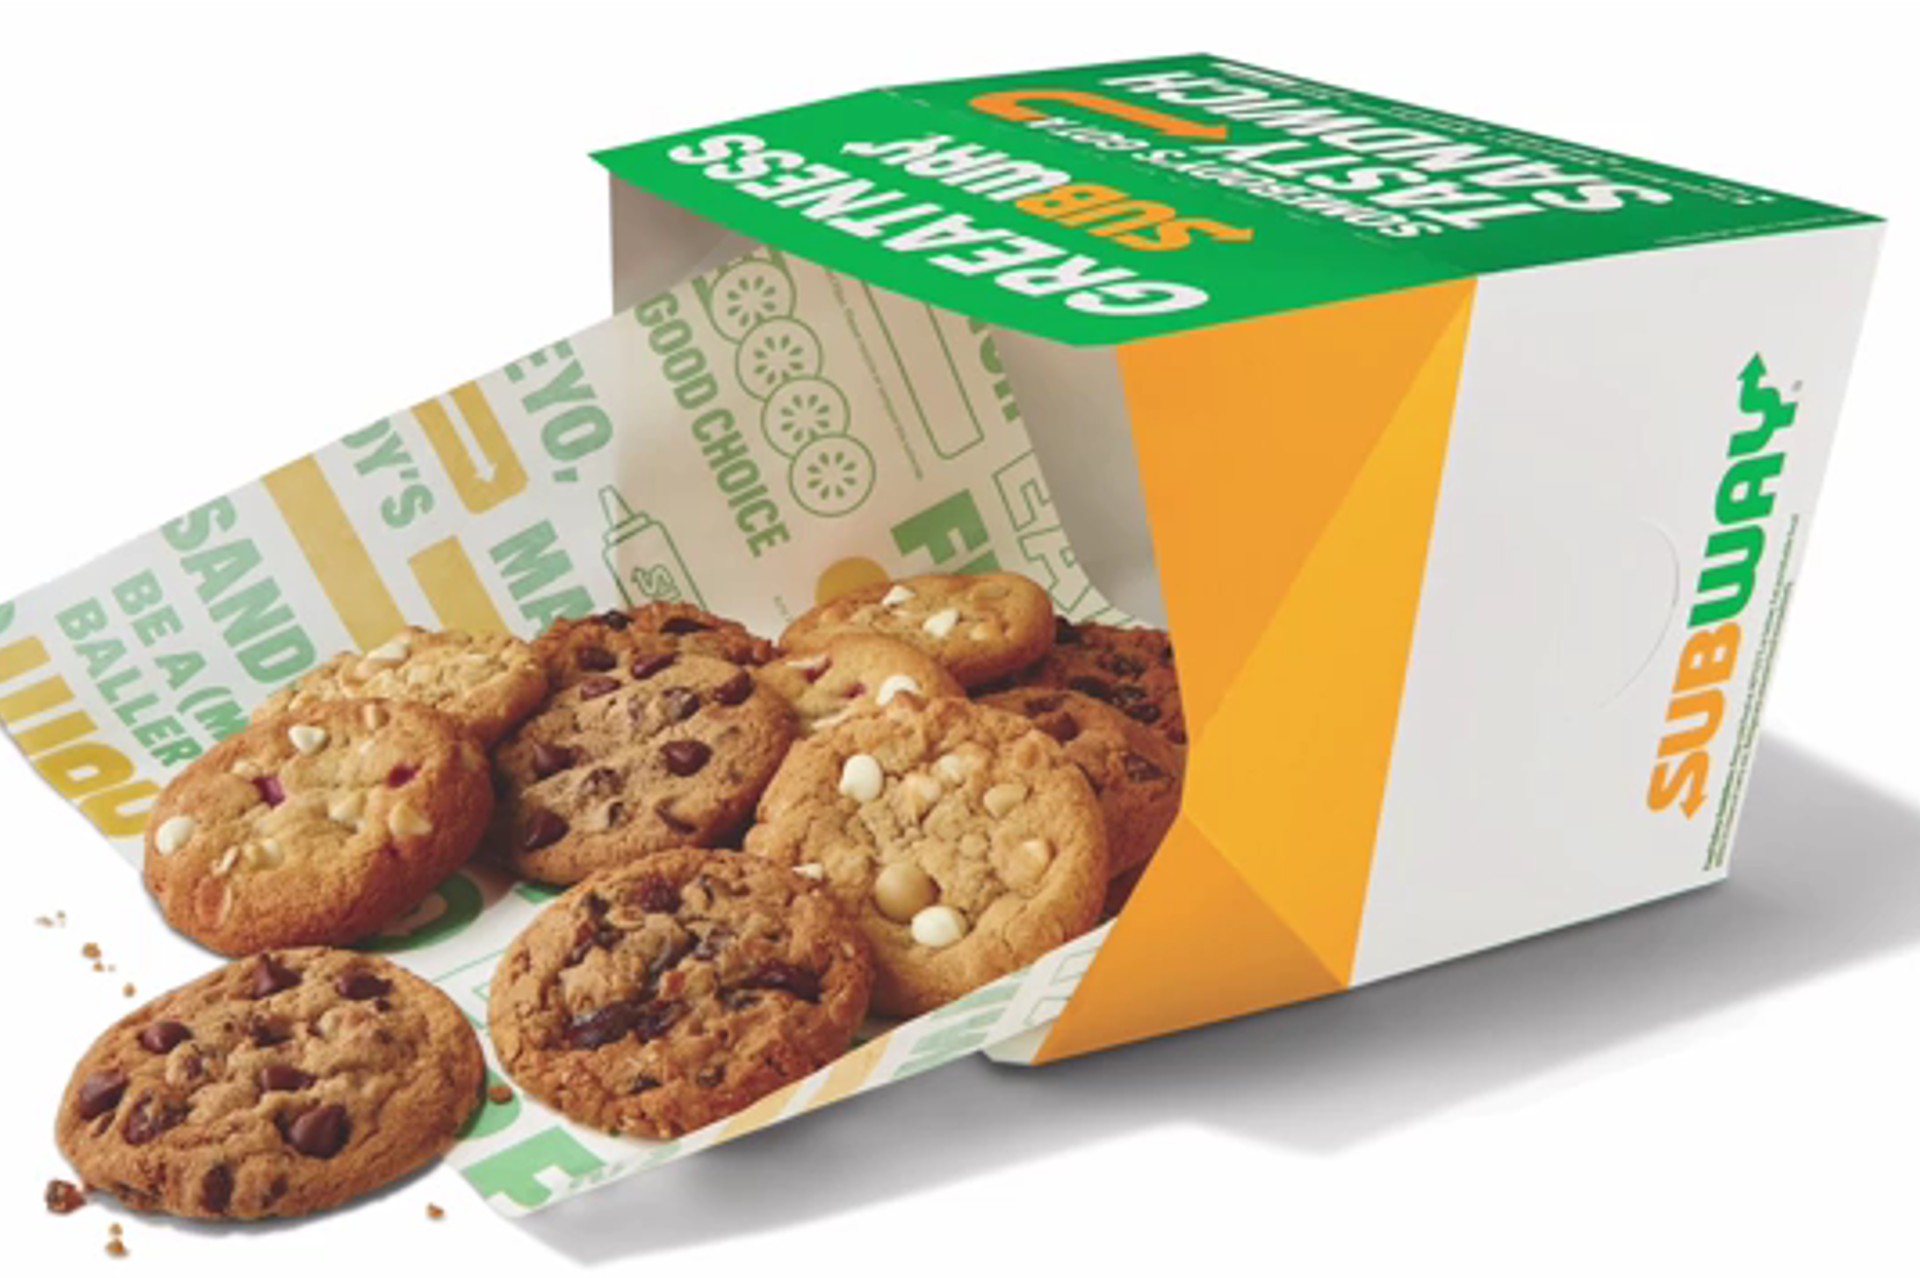 Subway Unveils the World's First Footlong Cookie Only Available on National Cookie Day